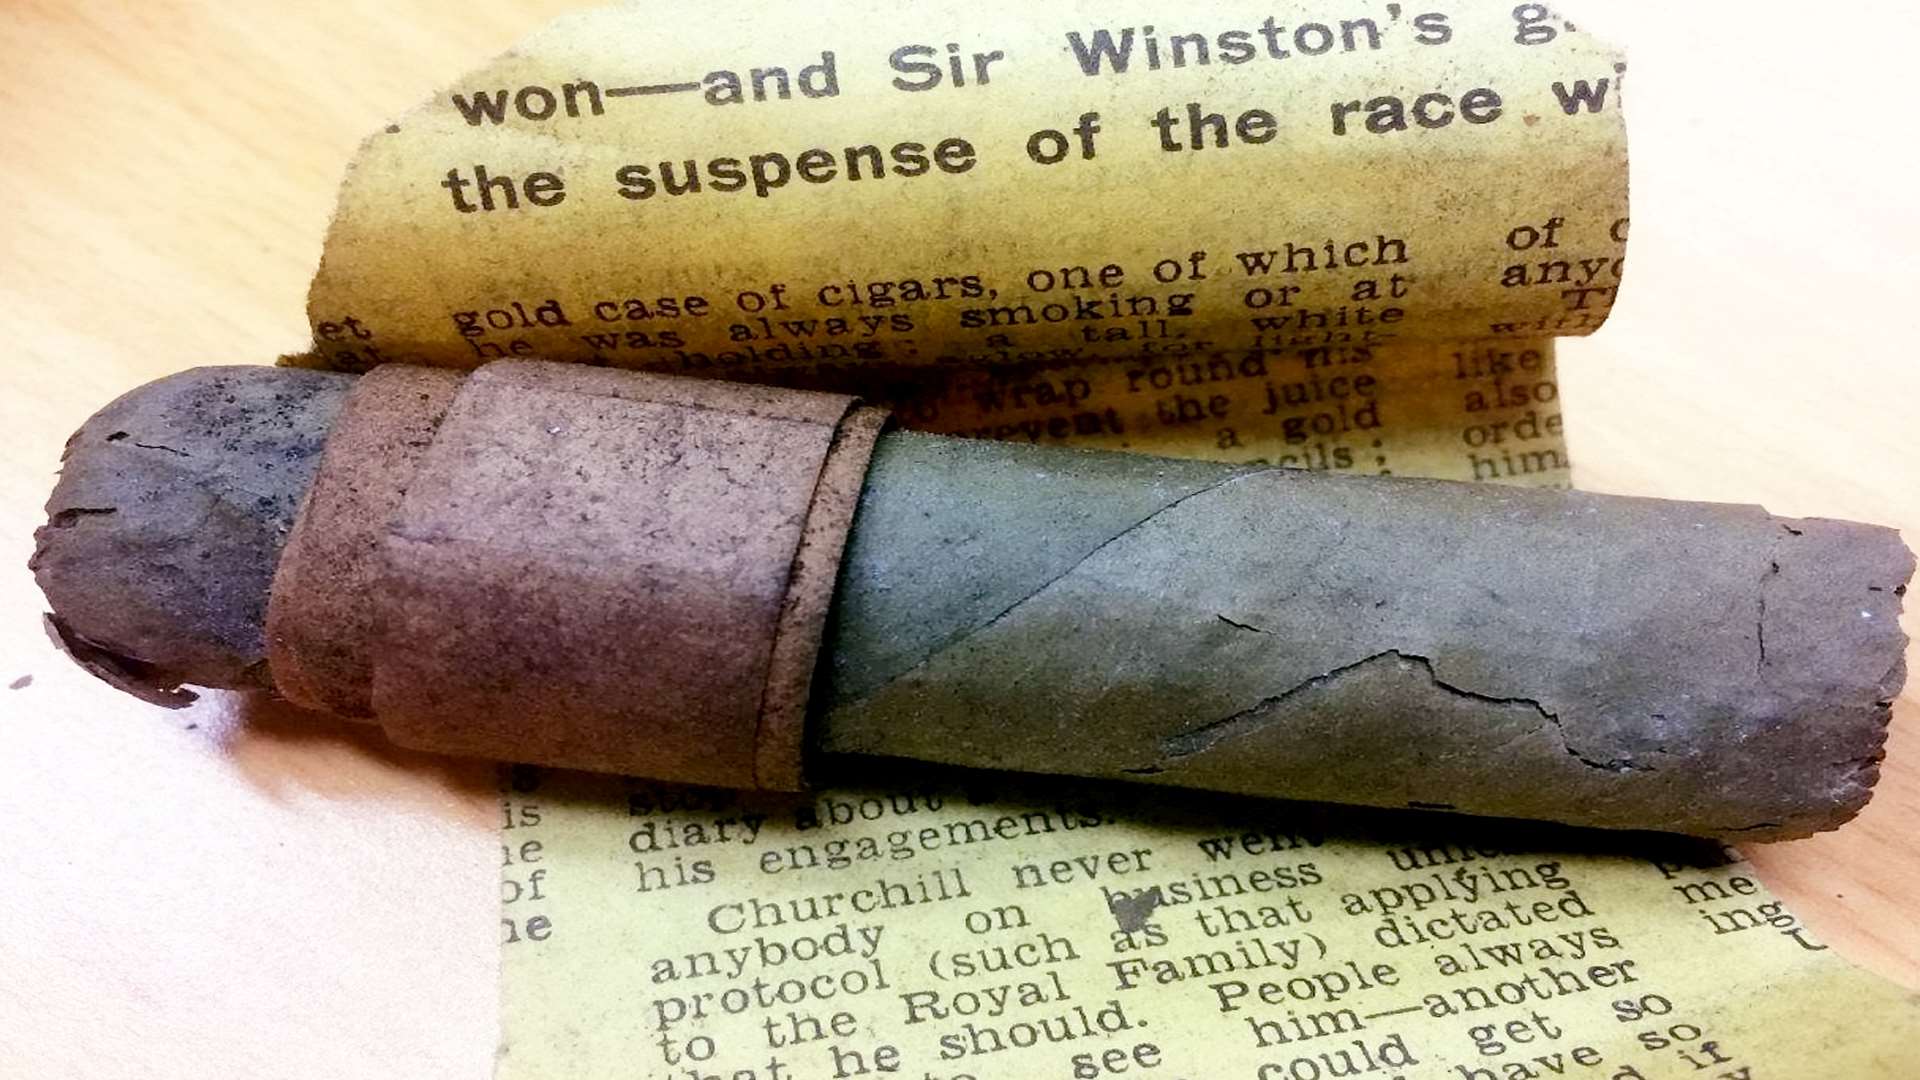 A cigar butt half-smoked by Sir Winston Churchill is going up for auction. Picture: SWNS.com